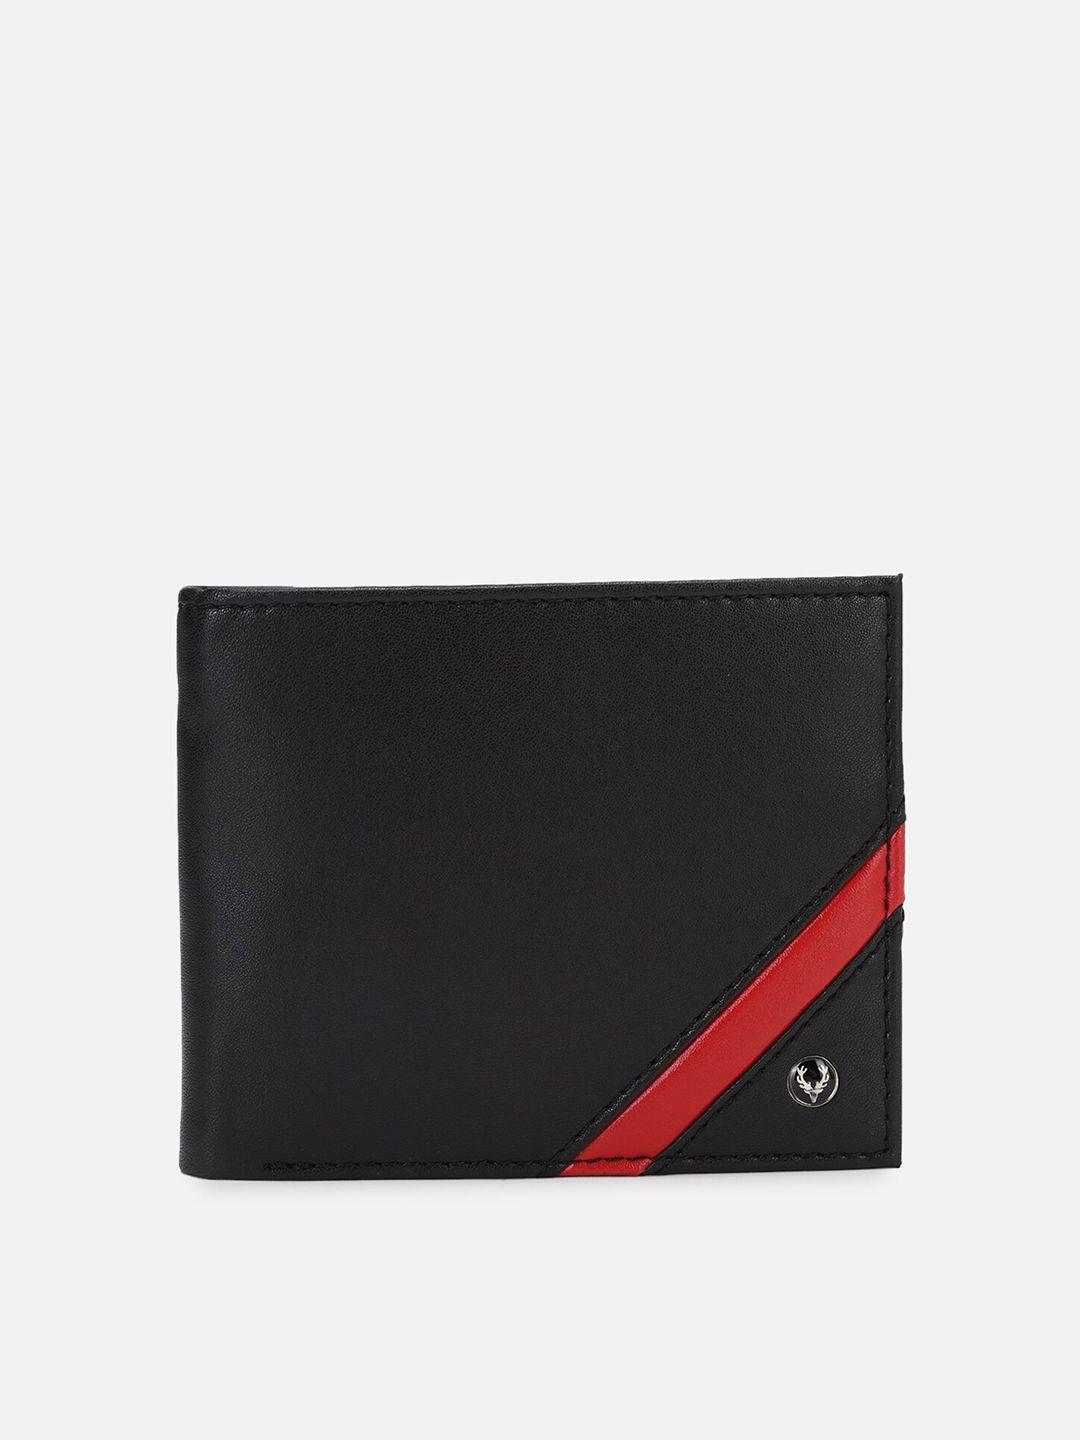 allen solly men black & red colourblocked leather two fold wallet